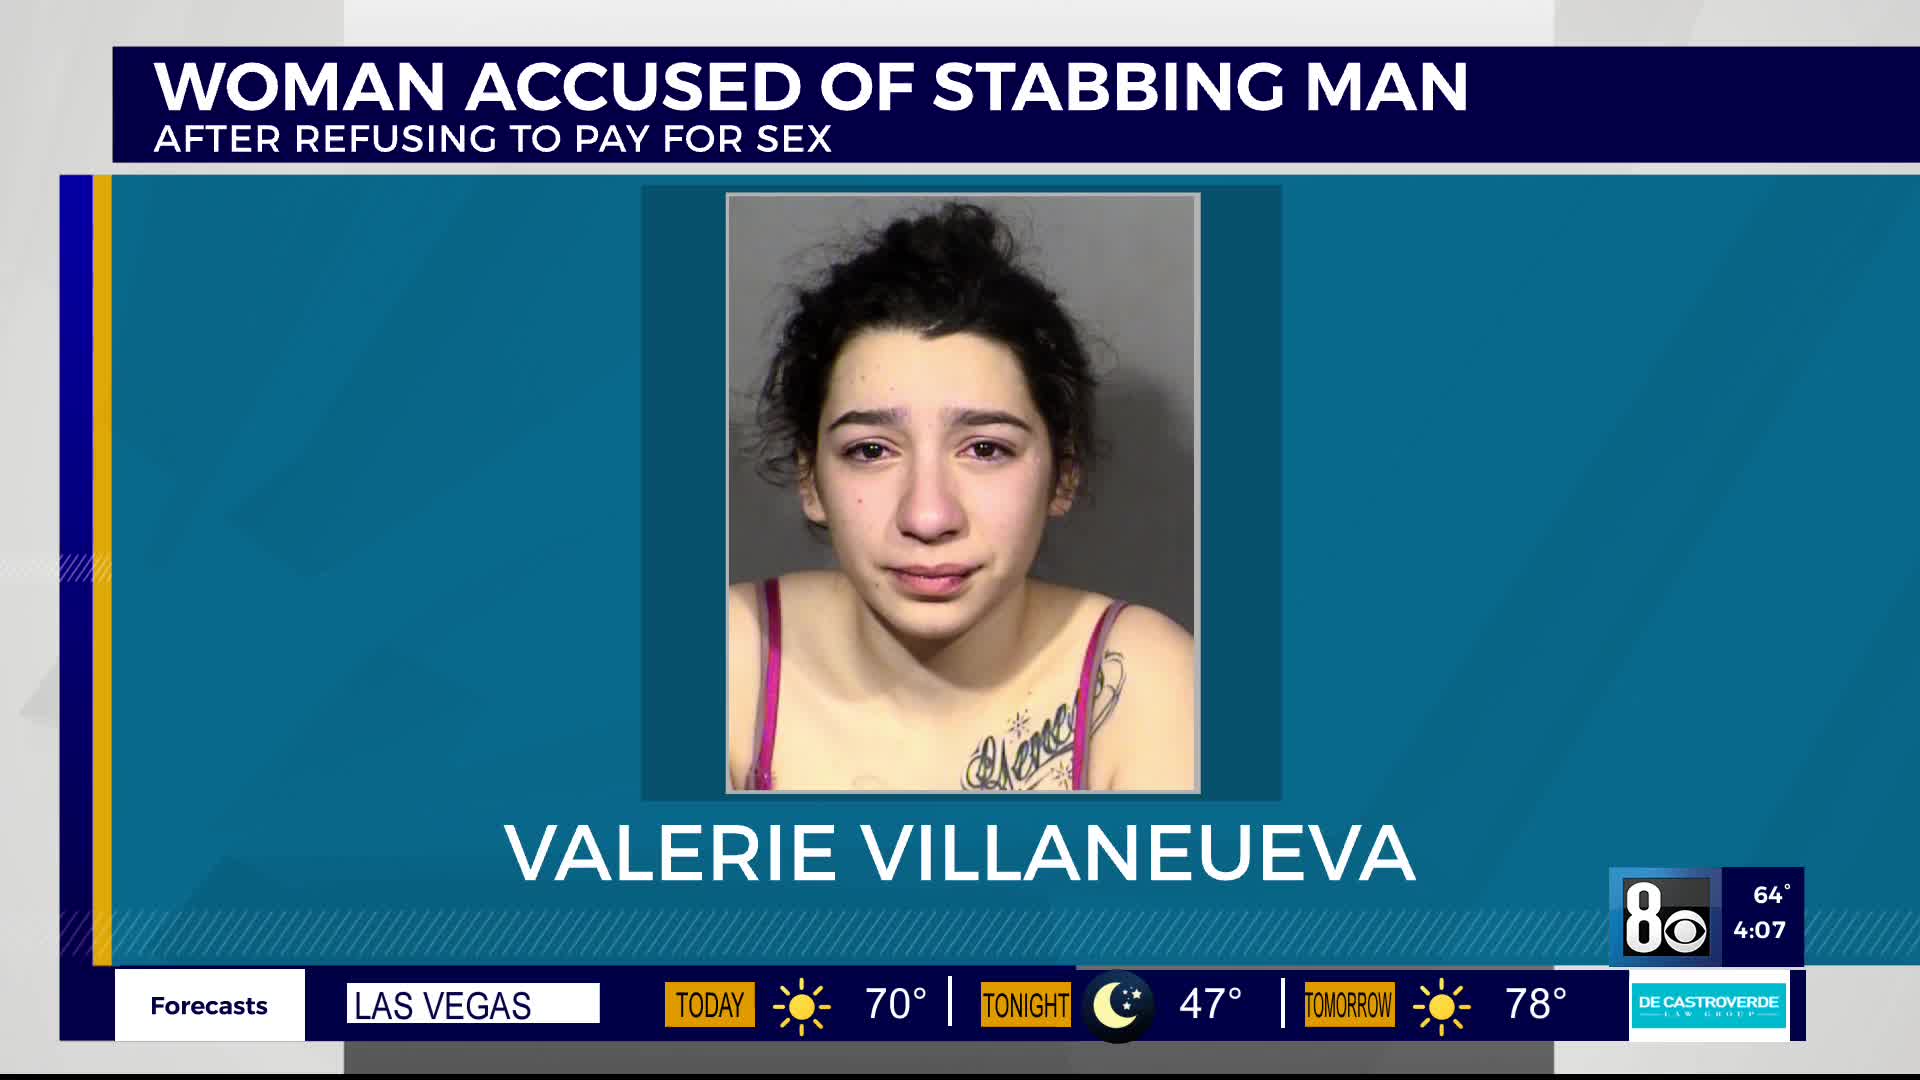 Las Vegas woman tries to kill man after he refuses to pay for sex, police